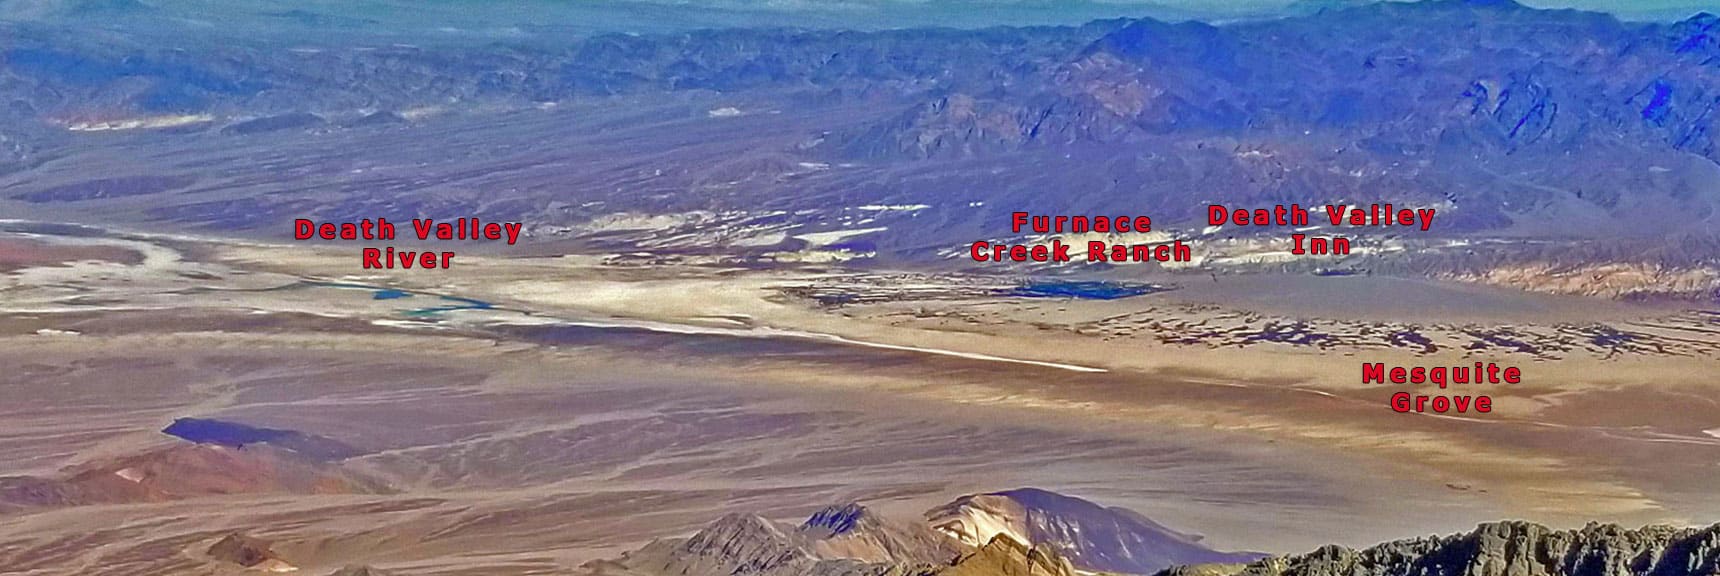 Death Valley River, Furnace Creek Ranch, Inn at Death Valley, Mesquite Grove | Aguereberry Point | Panamint Mountain Range | Death Valley National Park, California